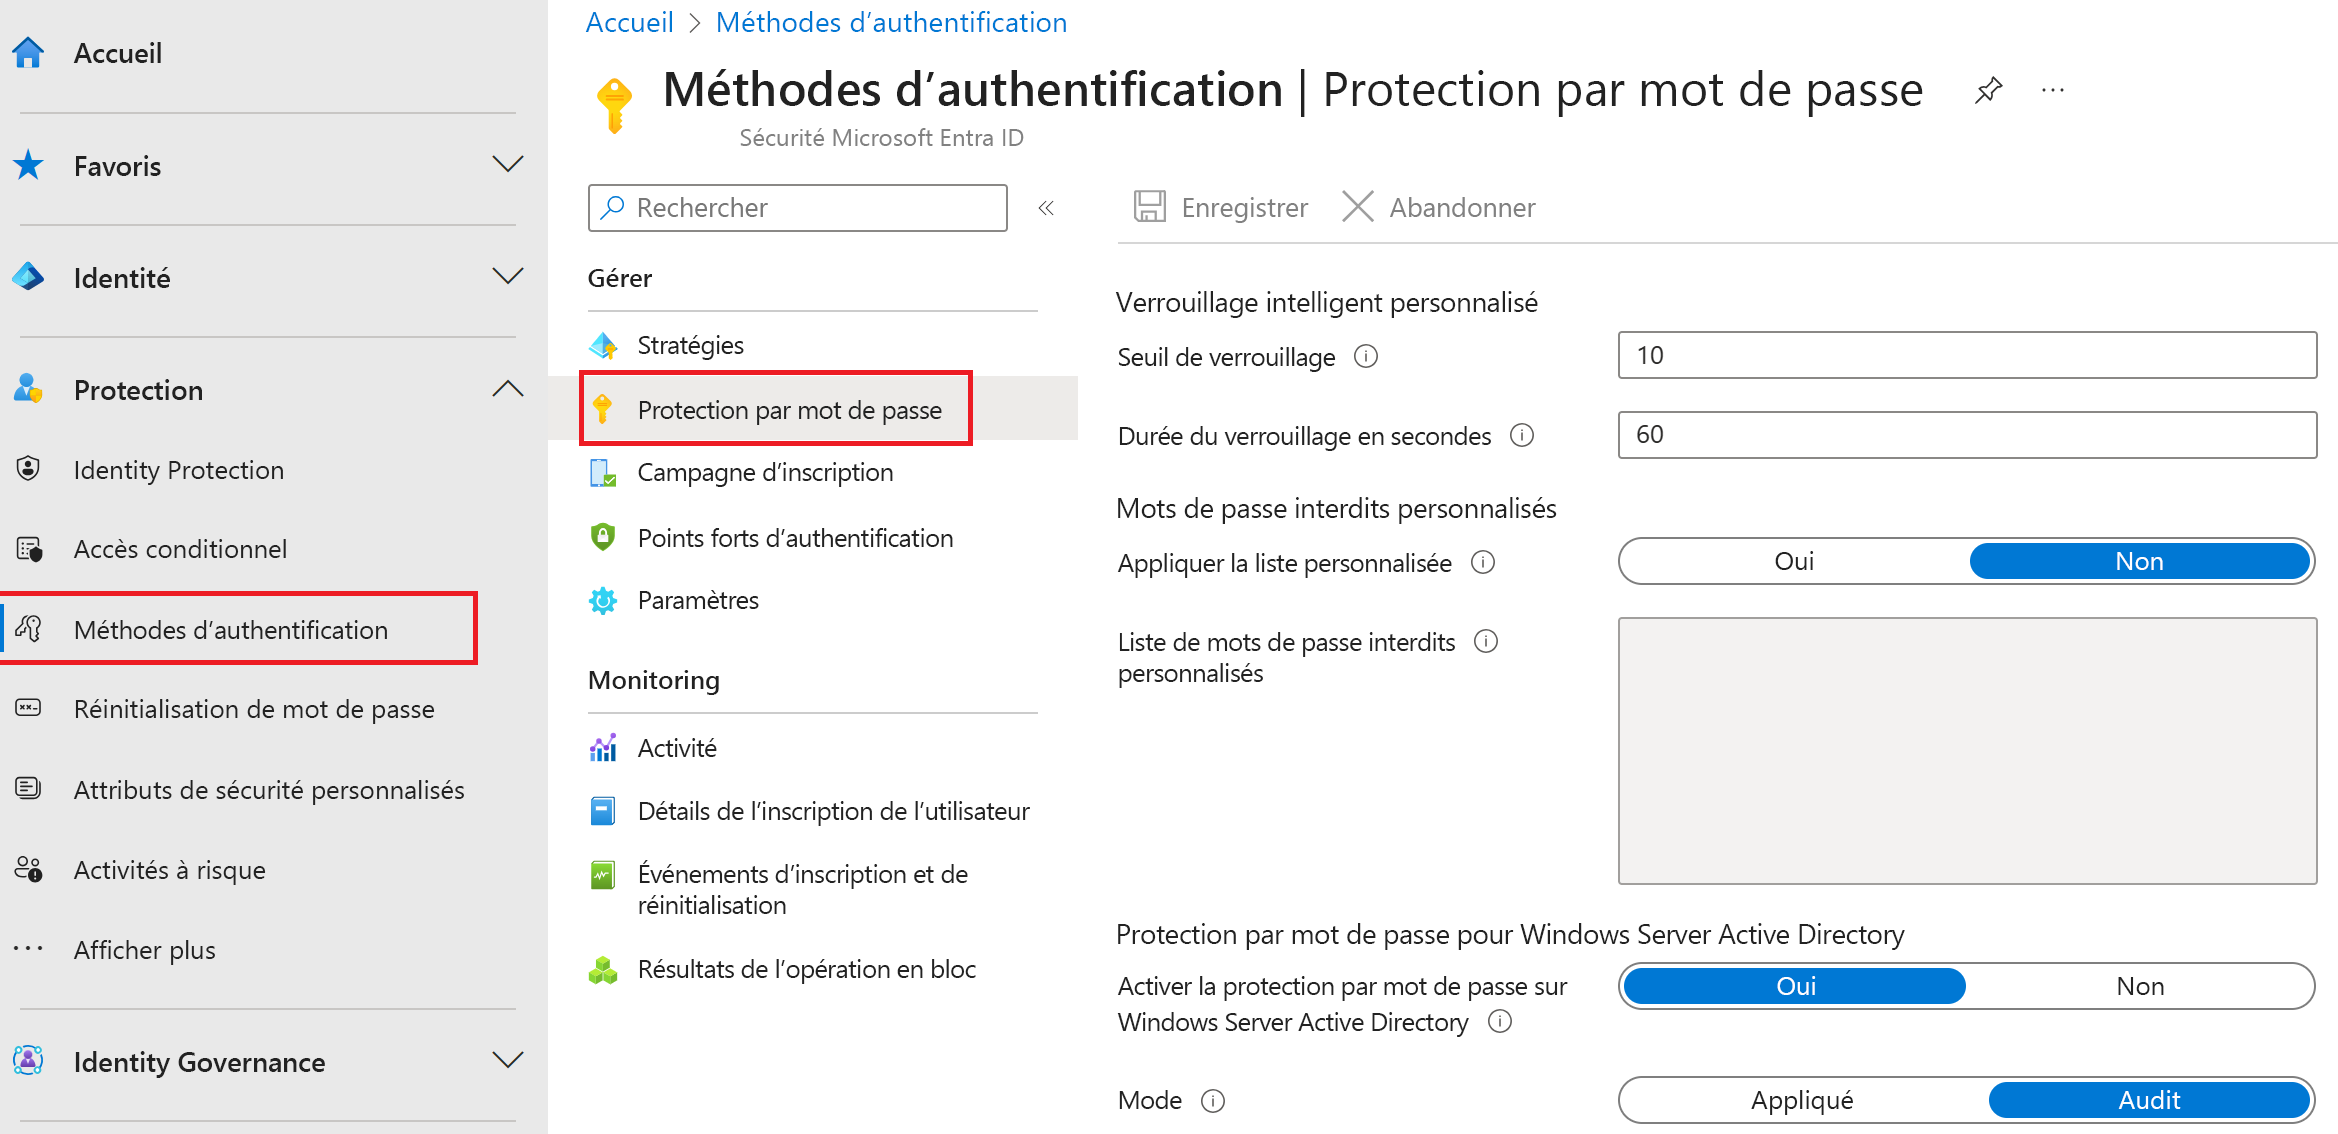 Screenshot of the Authentication methods dialog with the highlighted selections to browse to Password authentication.